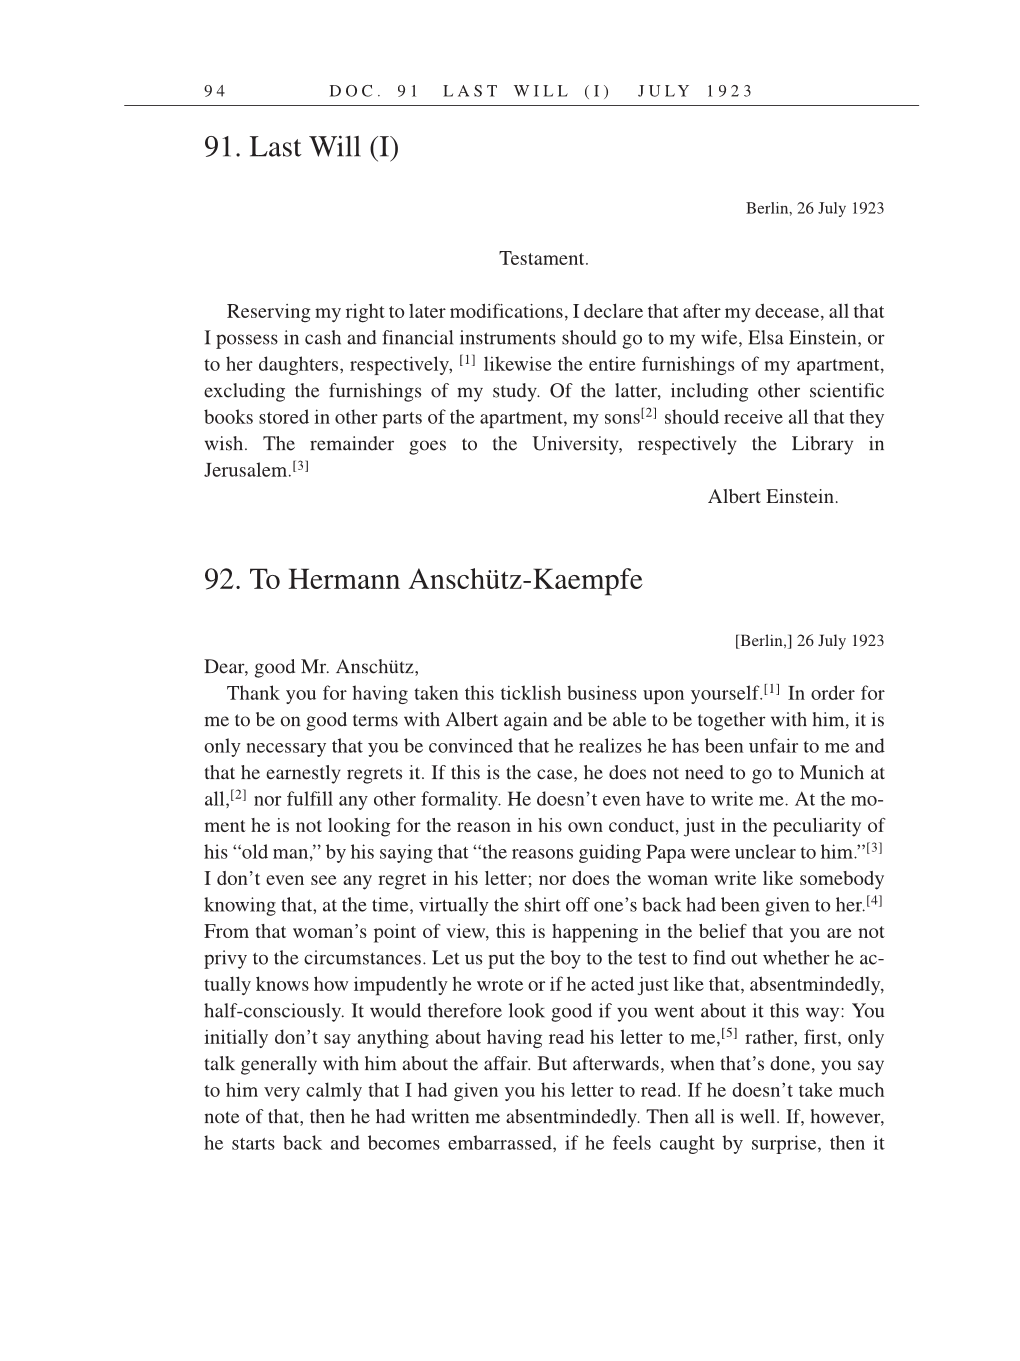 Volume 14: The Berlin Years: Writings & Correspondence, April 1923-May 1925 (English Translation Supplement) page 94